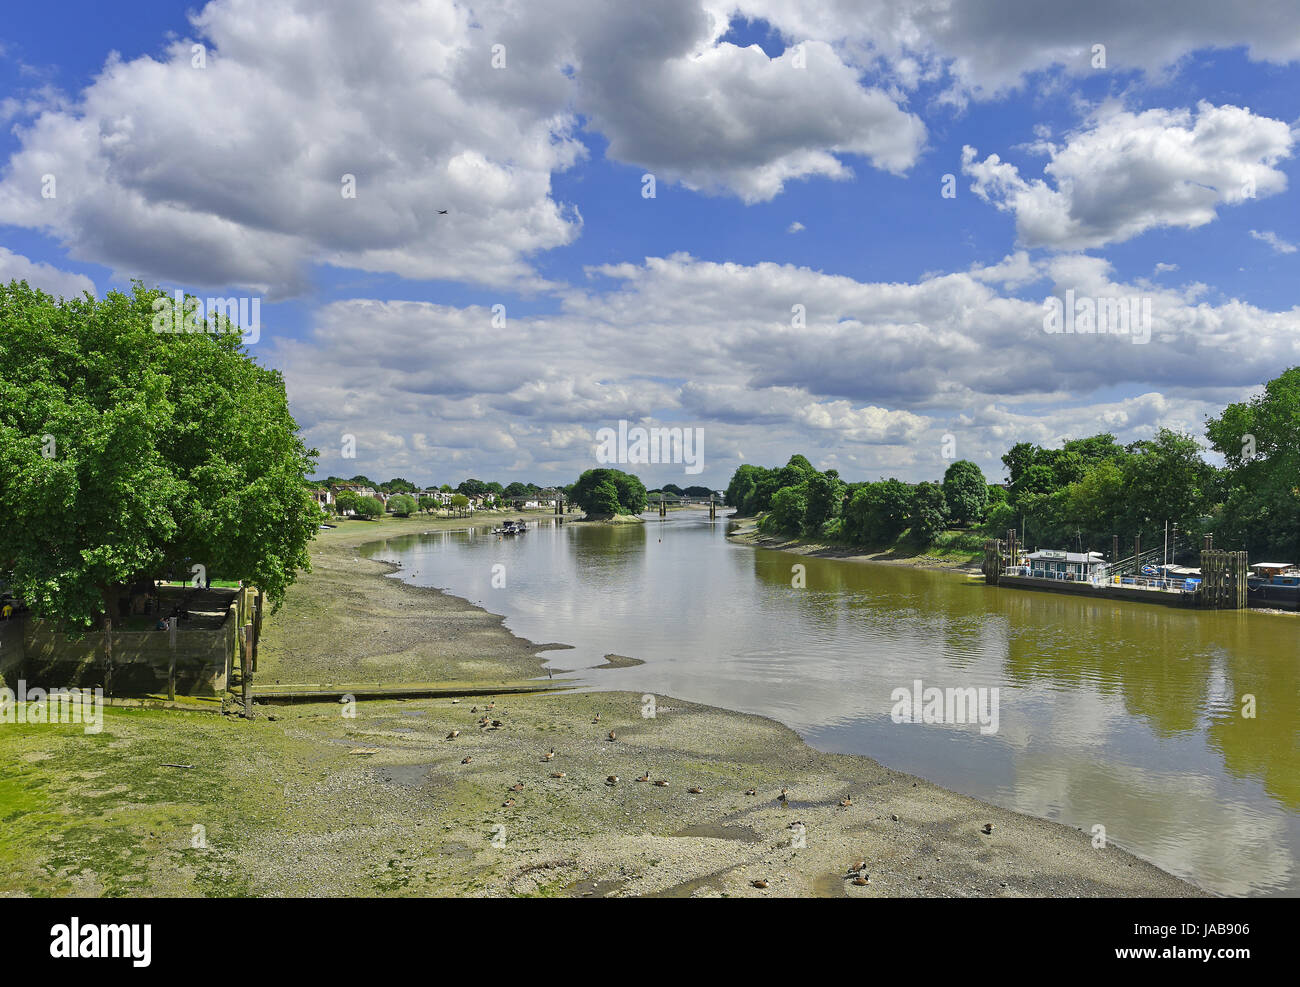 Thames River and the Kew Railway Bridge at Low Tide from the Kew Bridge Stock Photo